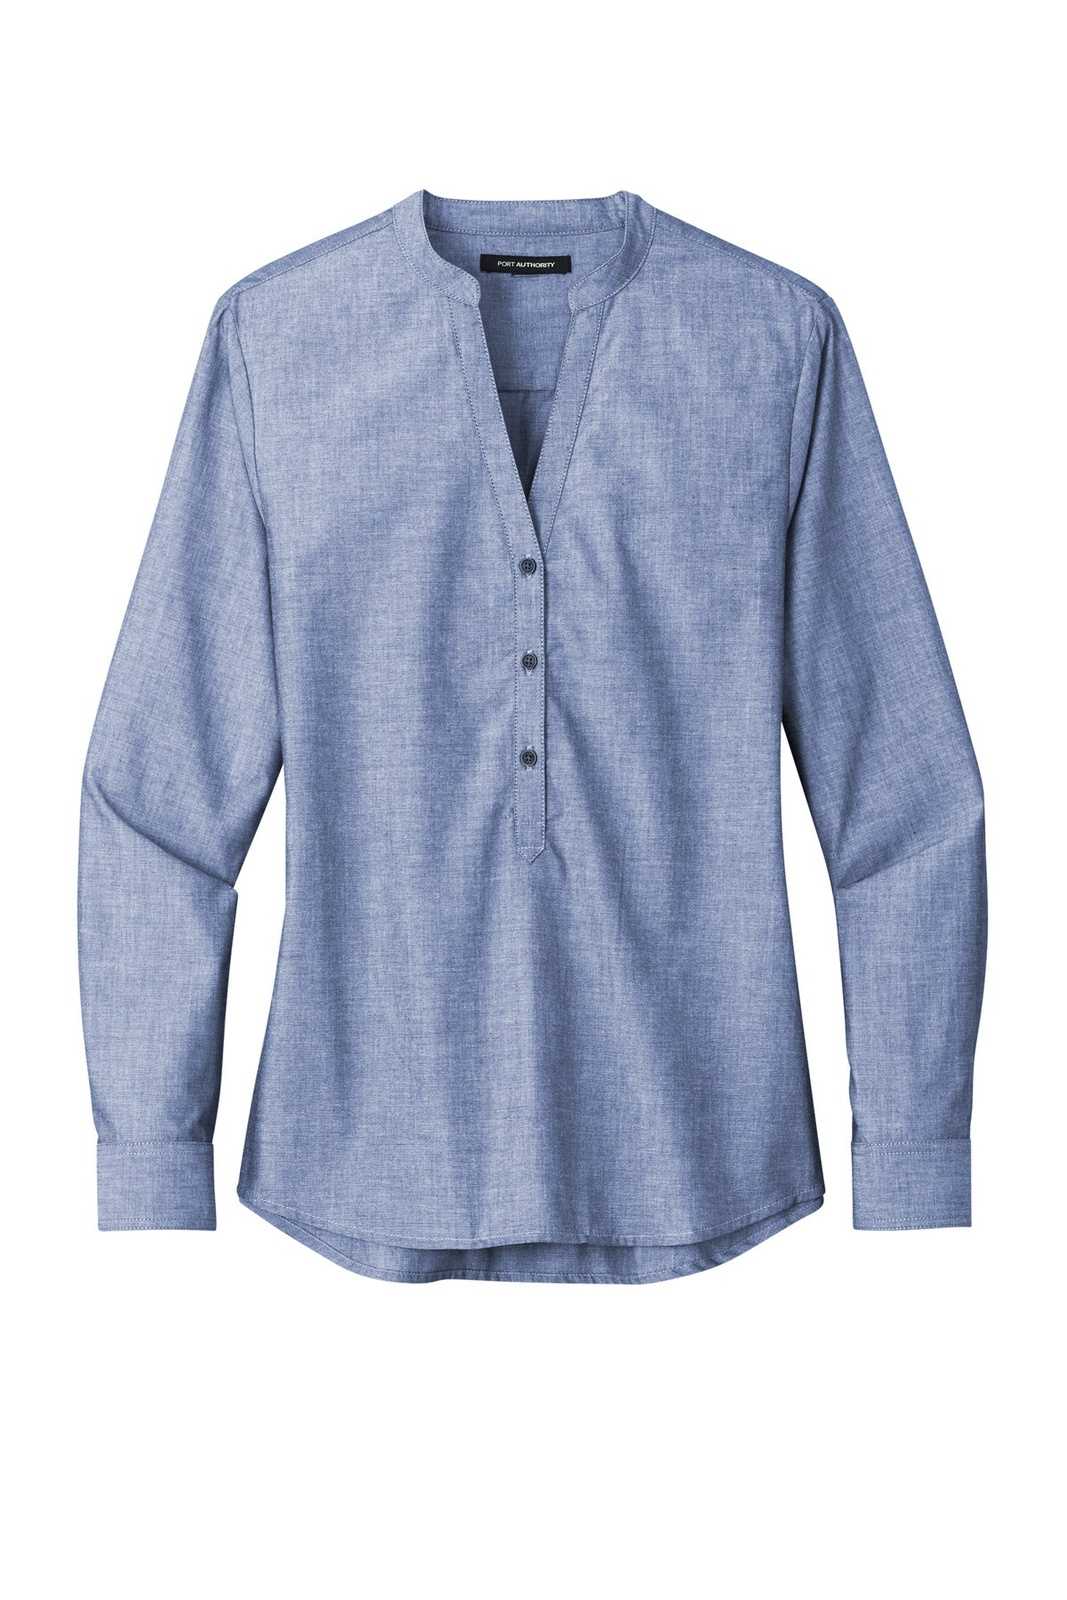 Port Authority LW382 Ladies Long Sleeve Chambray Easy Care Shirt - Moonlight Blue - HIT a Double - 2